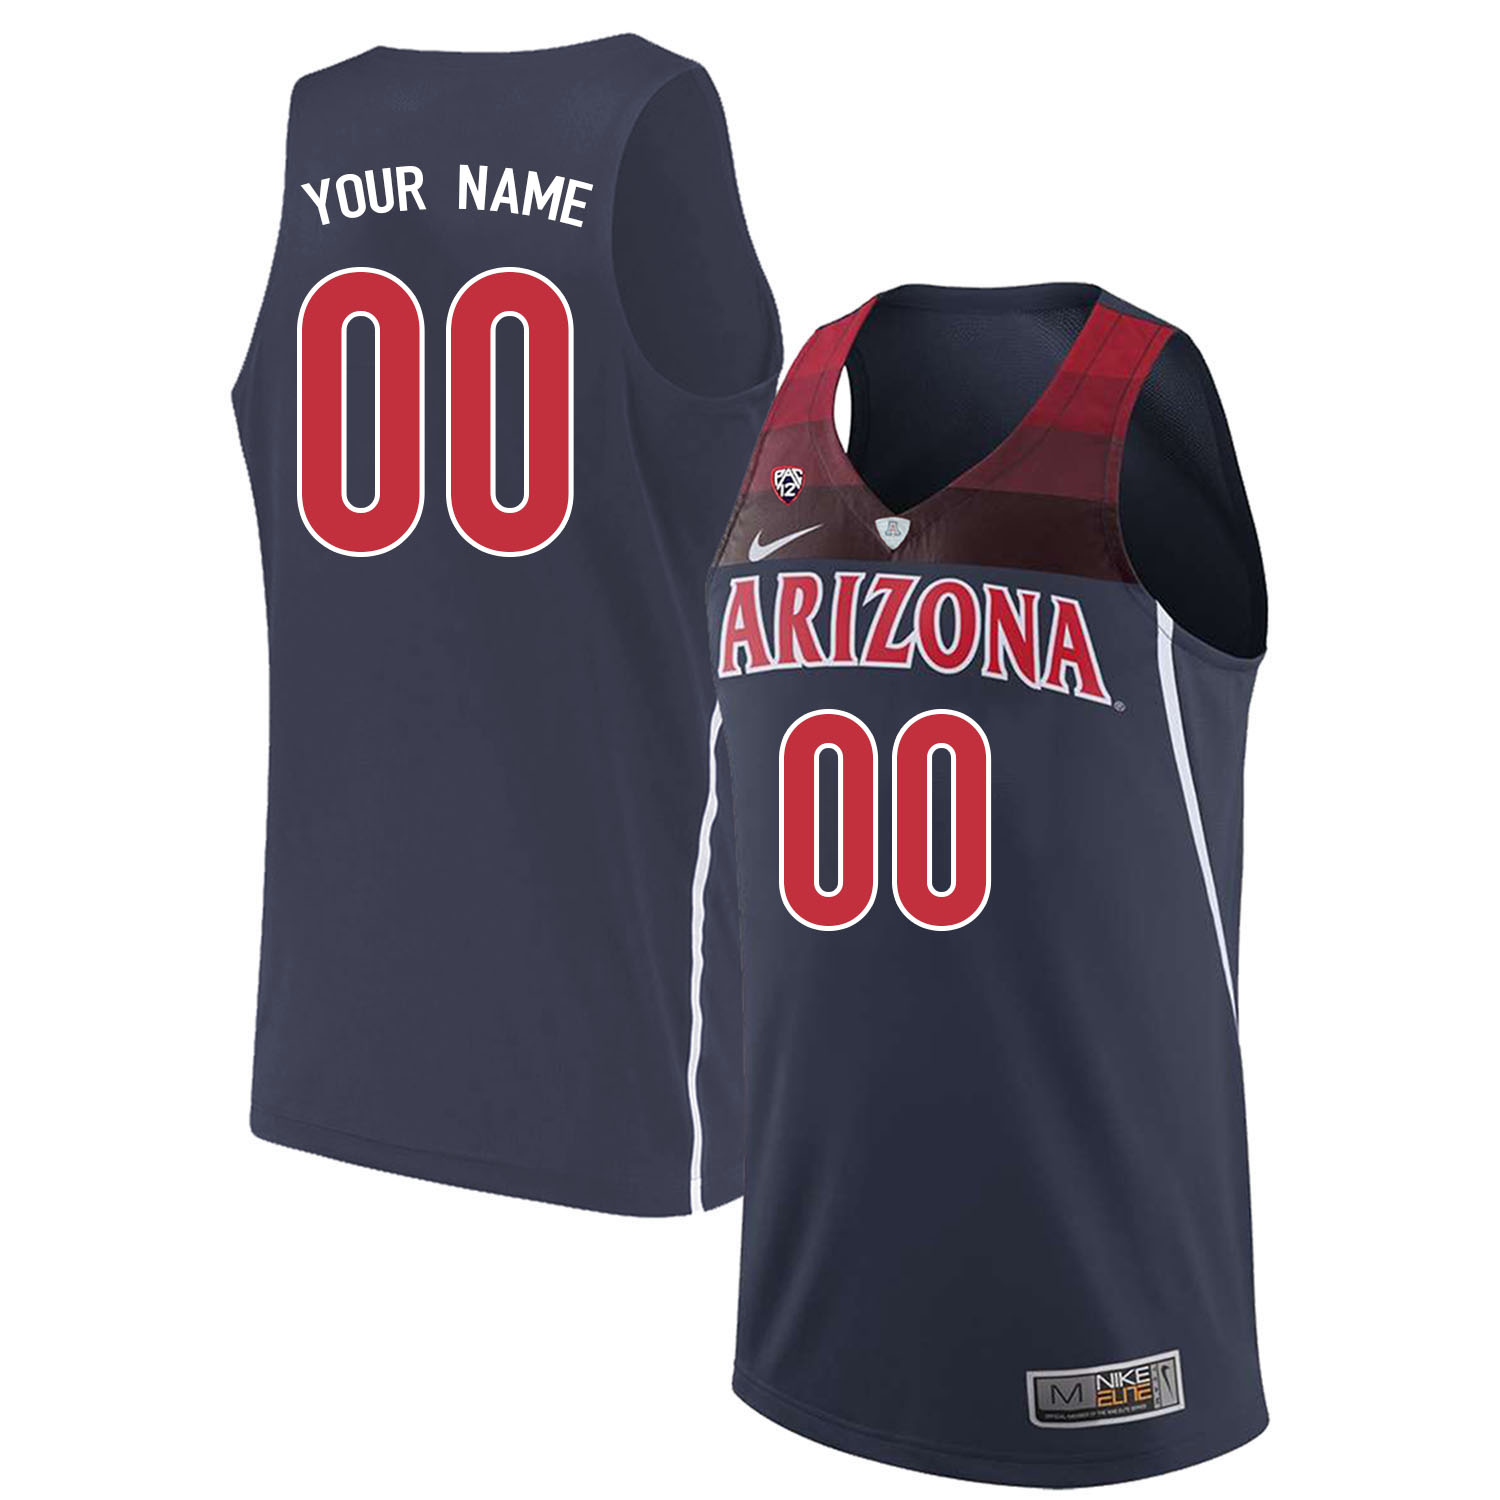 Custom Arizona Wildcats Name And Number College Basketball Jerseys Stitched-Navy